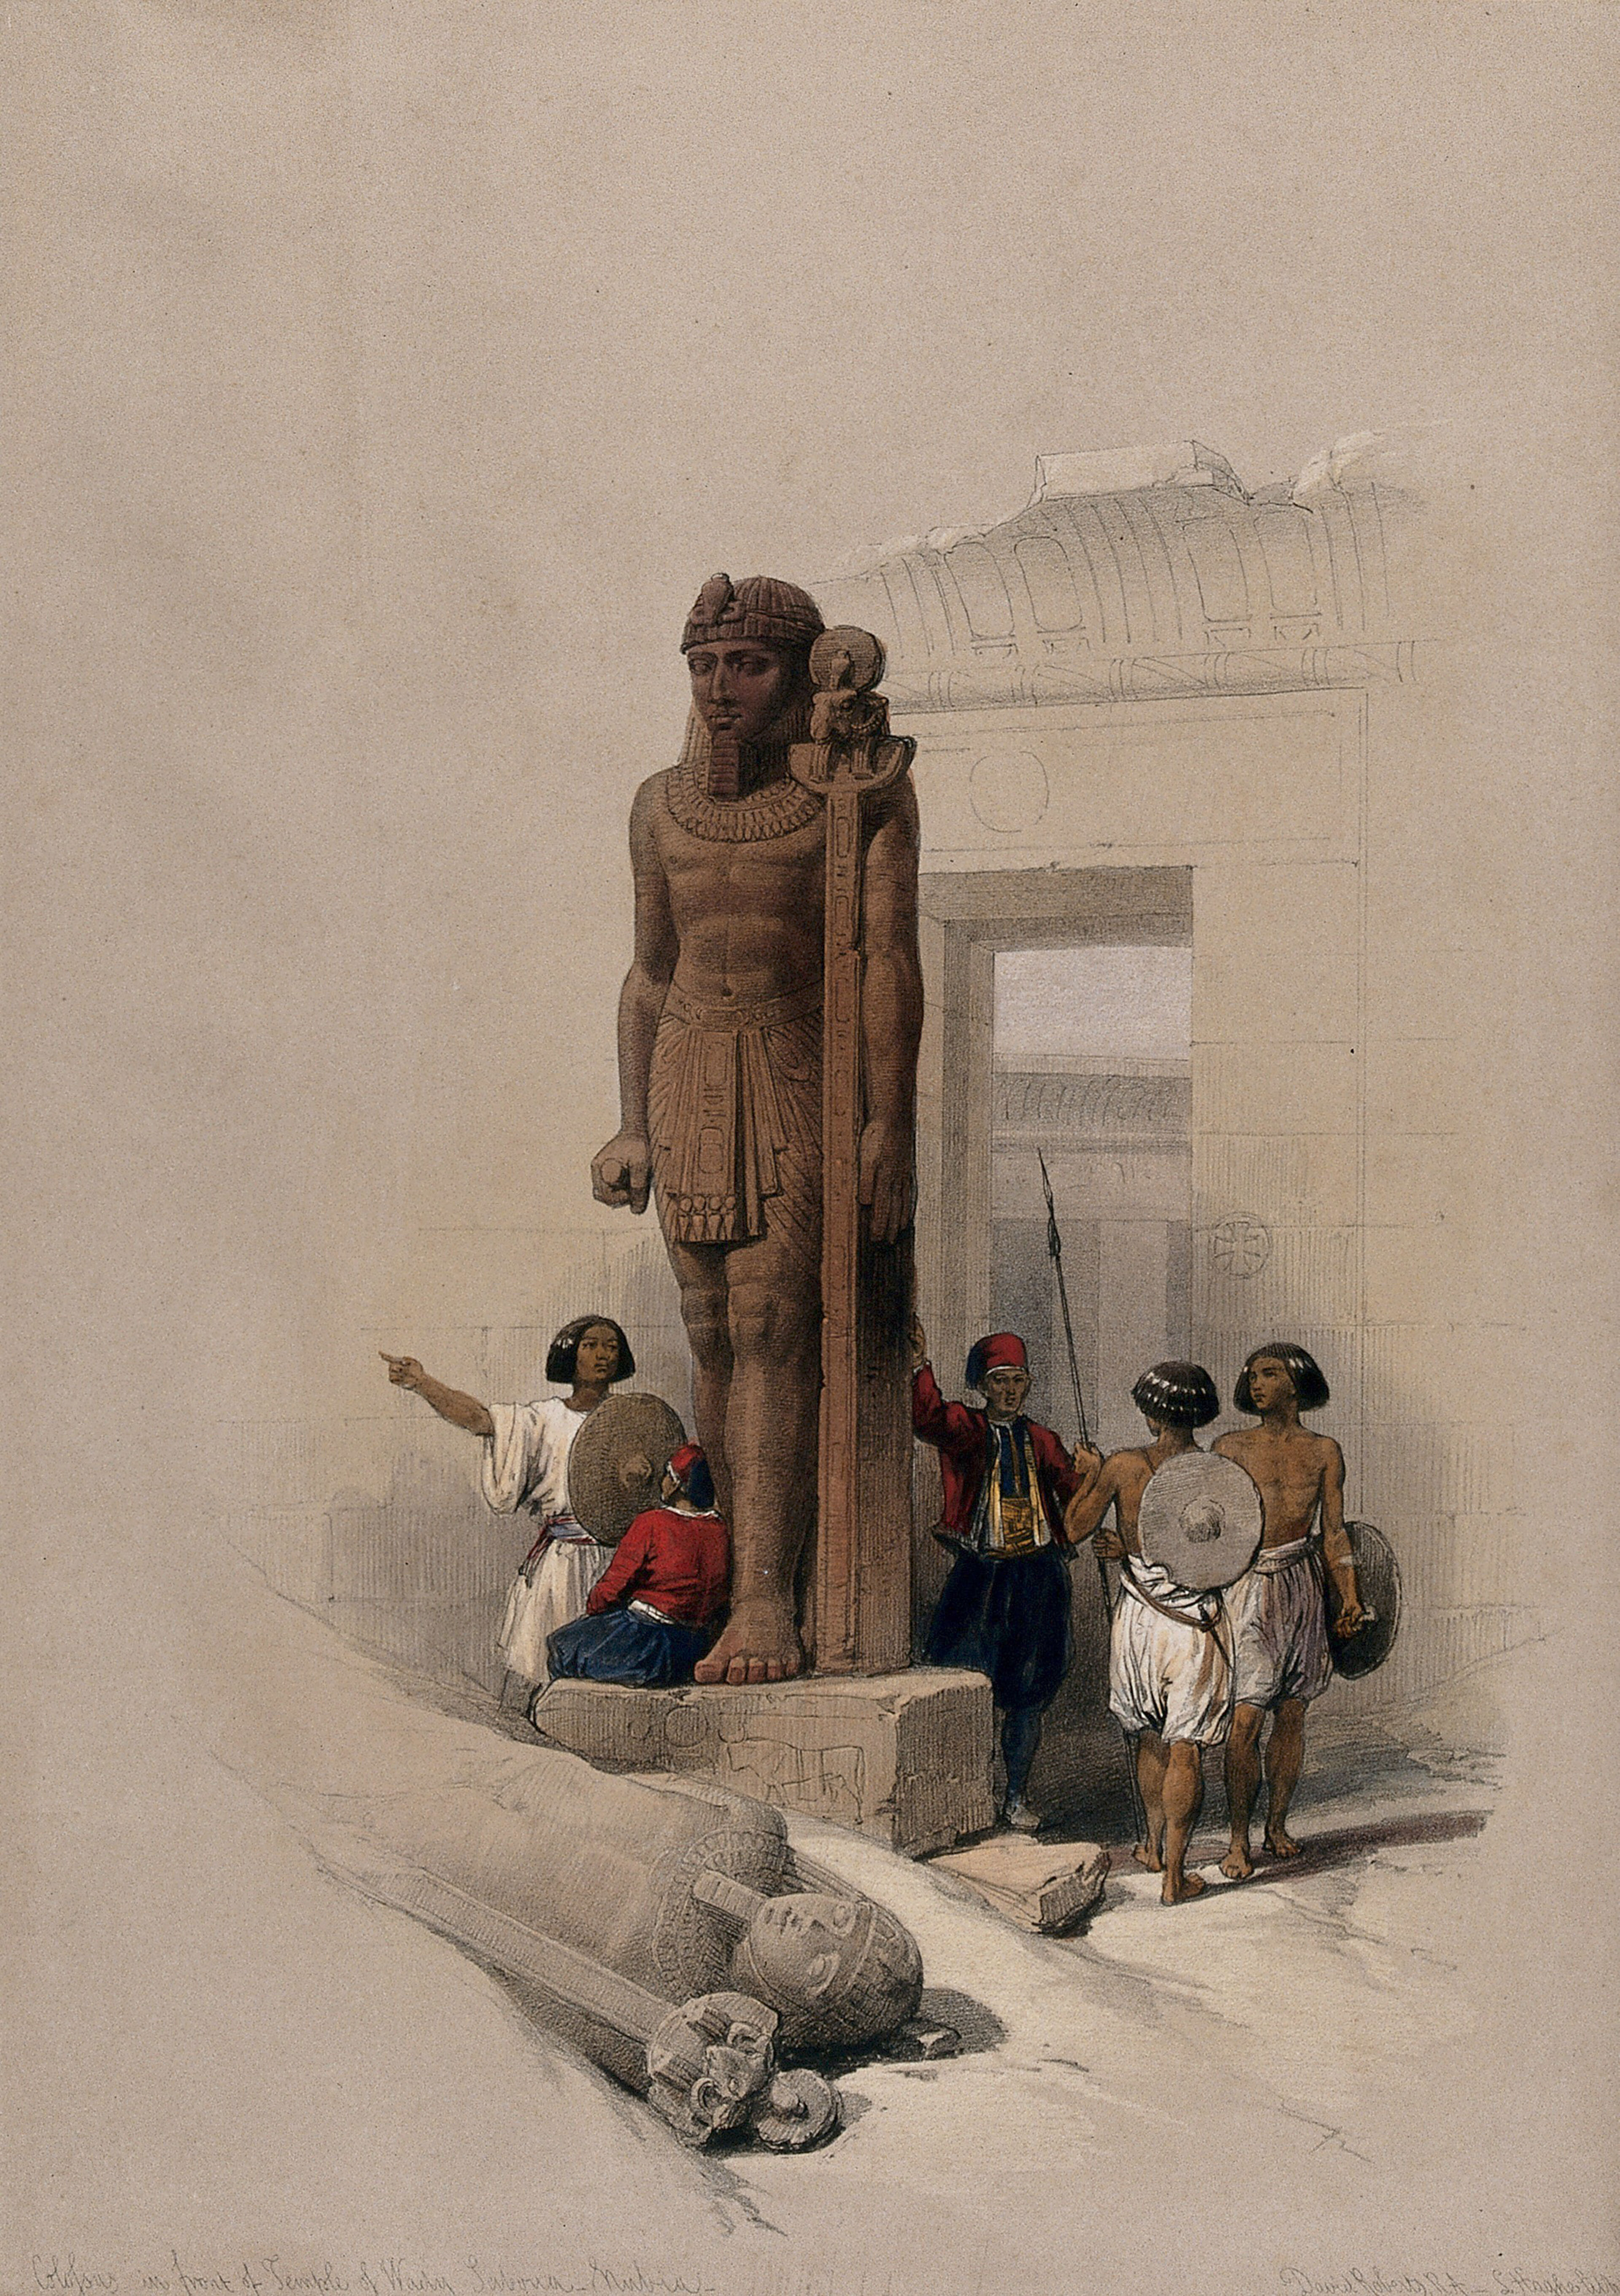 Statue at the temple at Wadi Saboua, Egypt. Coloured lithograph by Louis Haghe after David Roberts, 1849.